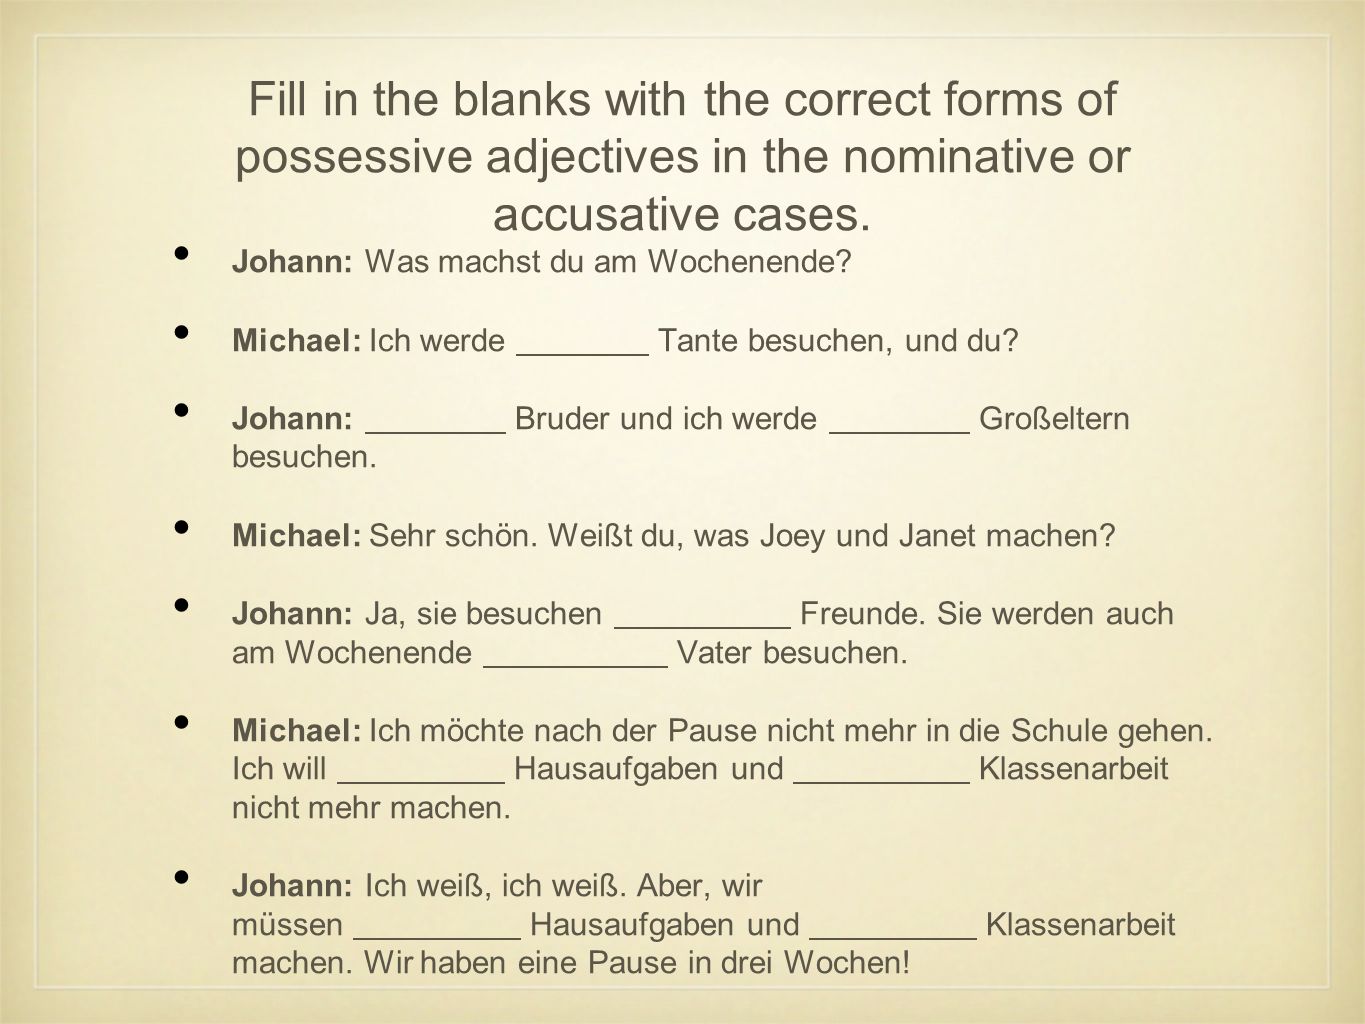 Fill in the blanks with the correct forms of possessive adjectives in the nominative or accusative cases.